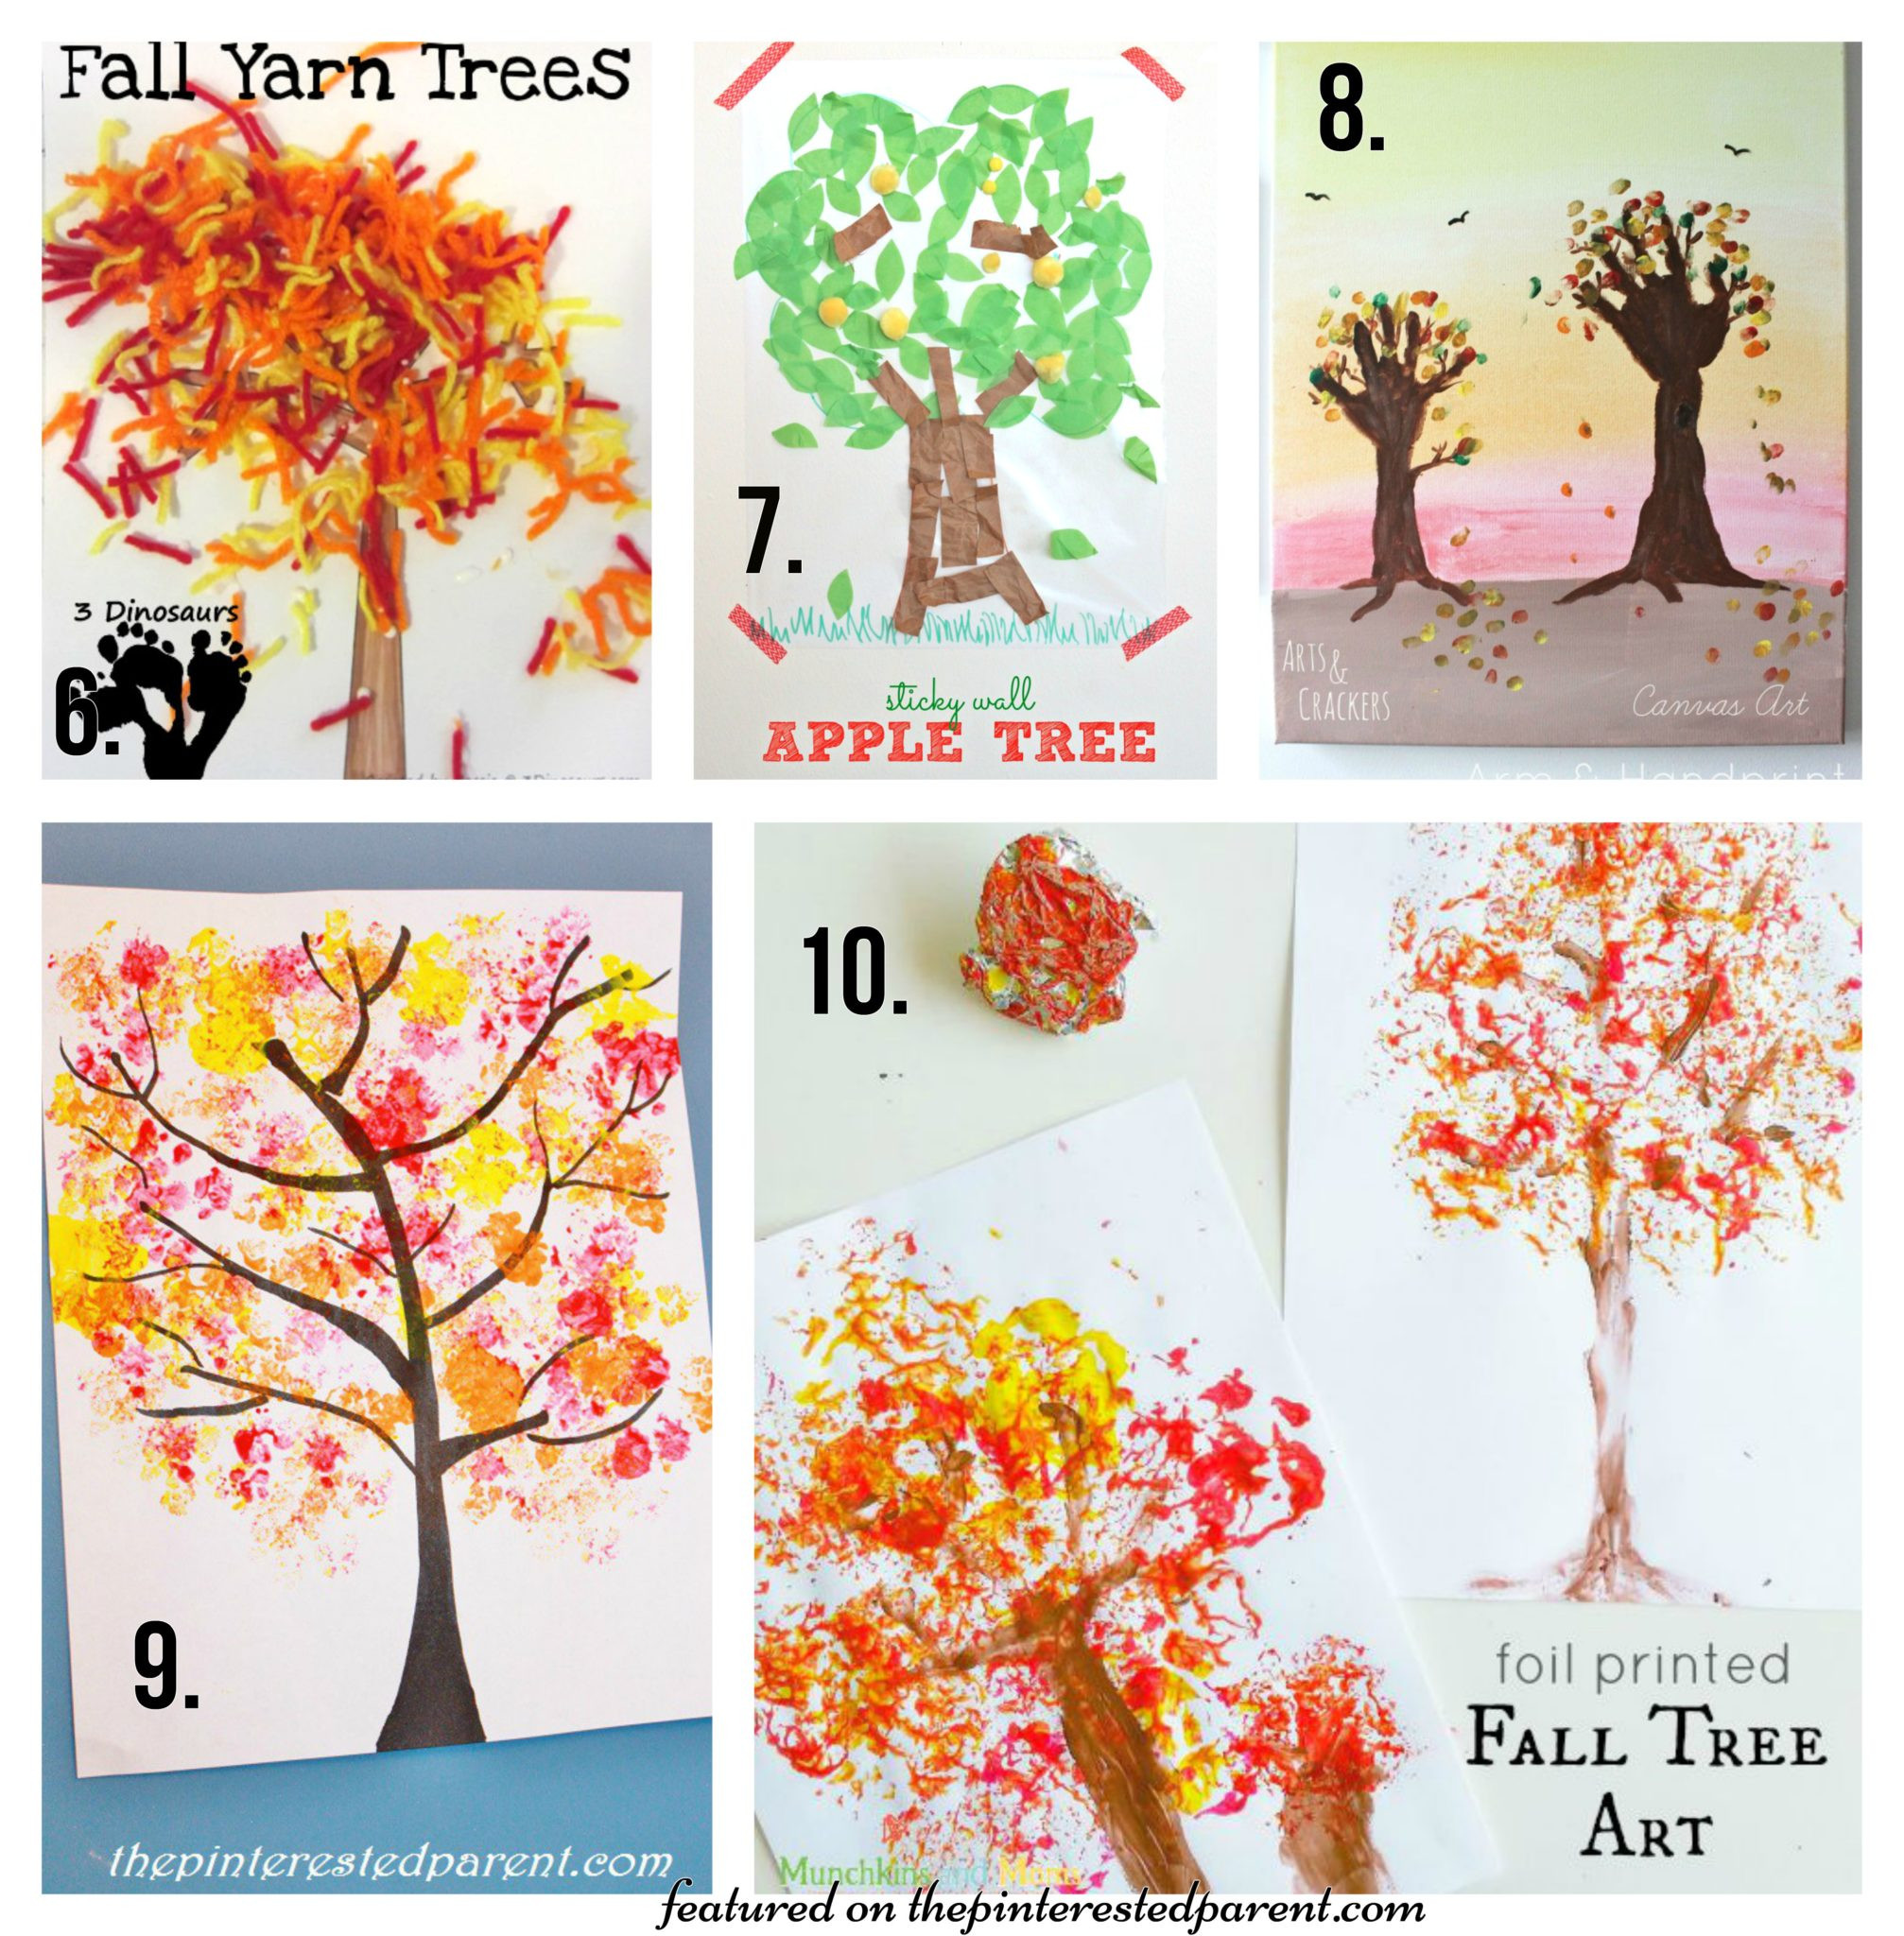 Autumn Arts And Crafts
 20 Fall Tree Arts & Crafts Ideas For Kids – The